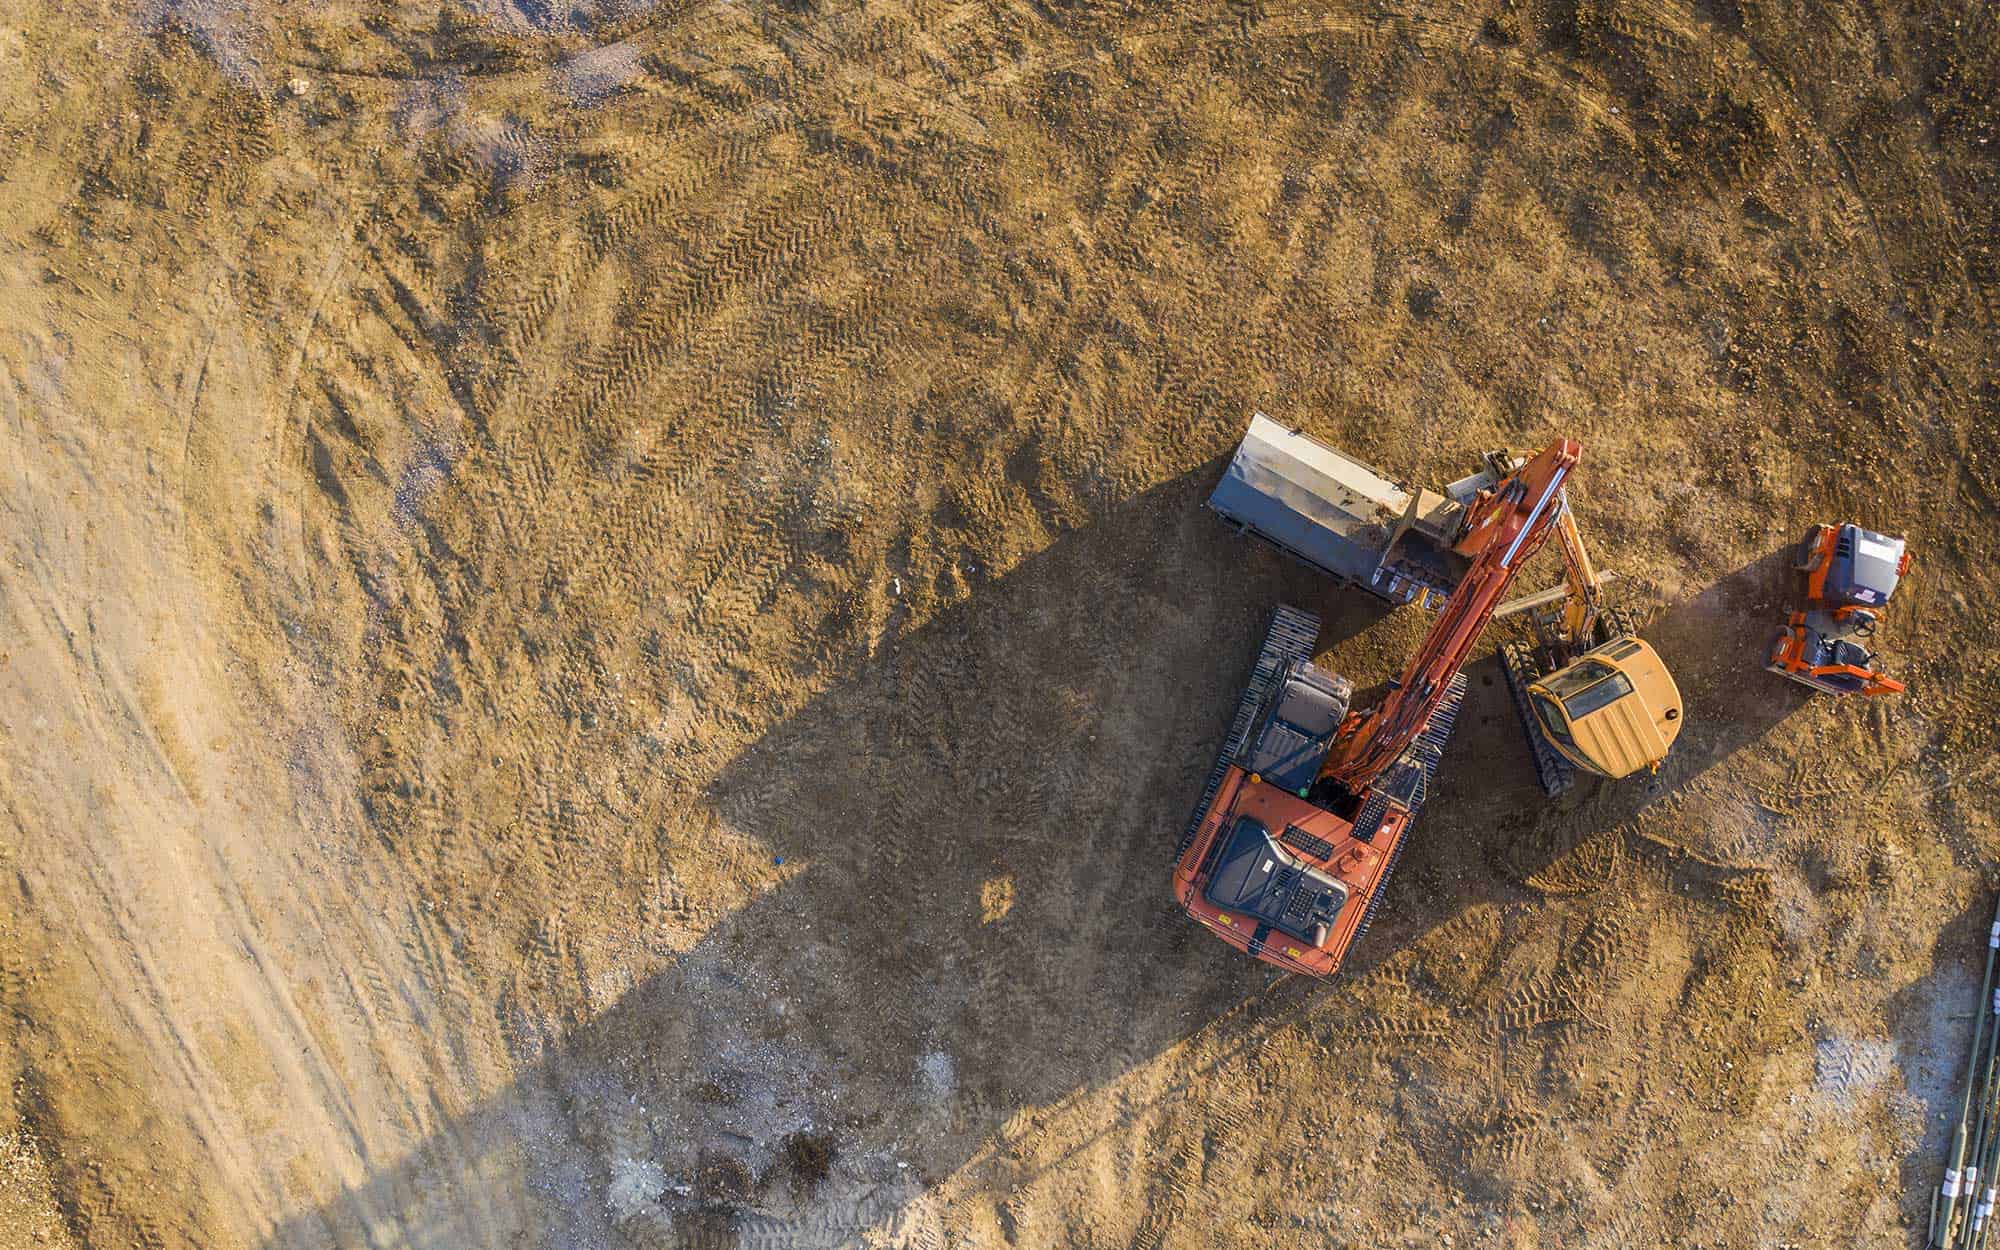 Overhead views of construction vehicles